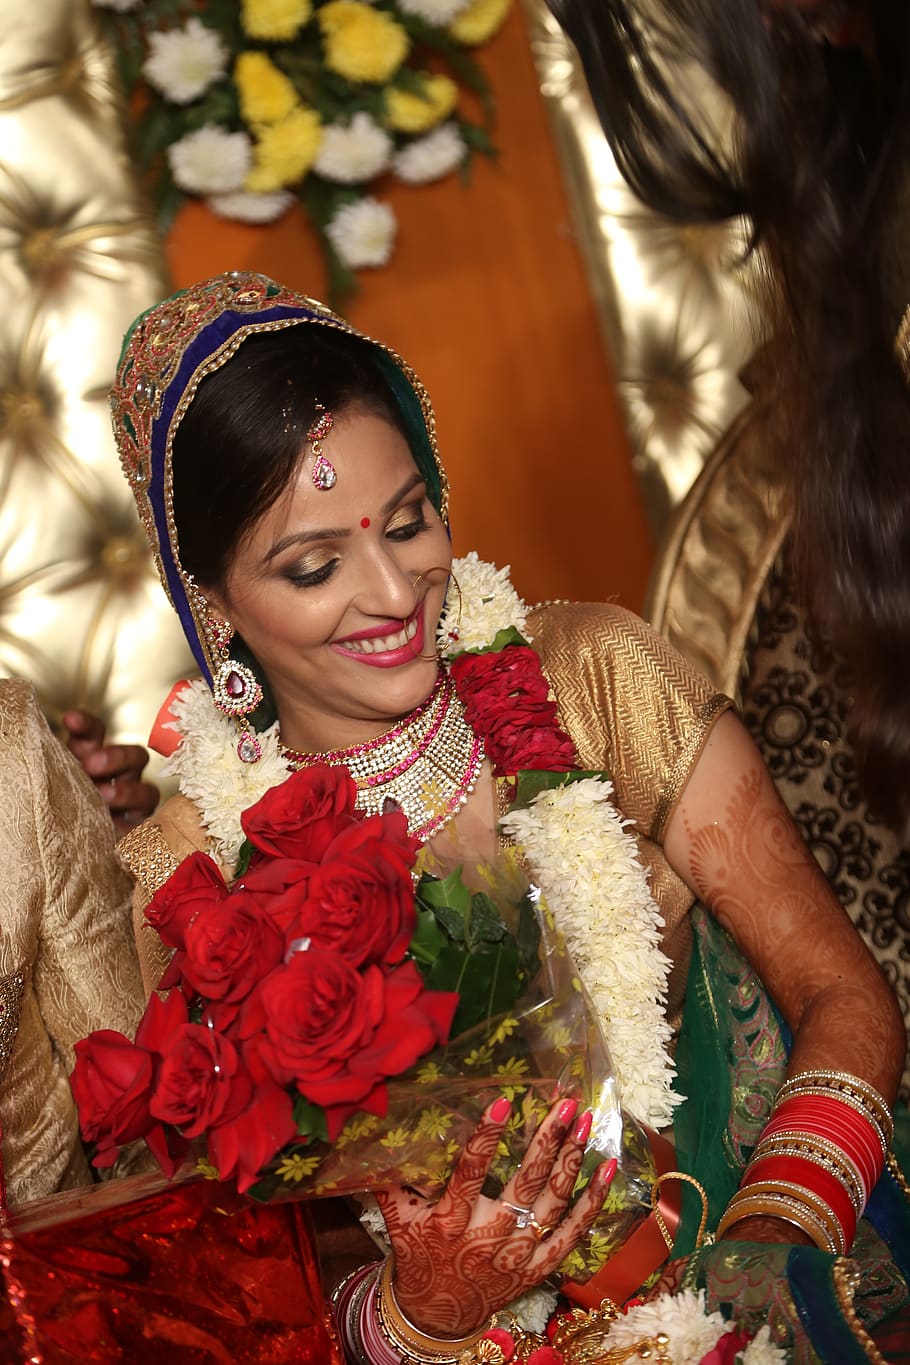 bride, wedding, marriage, indian, smiling, traditional clothing, real people, happiness, celebration, clothing